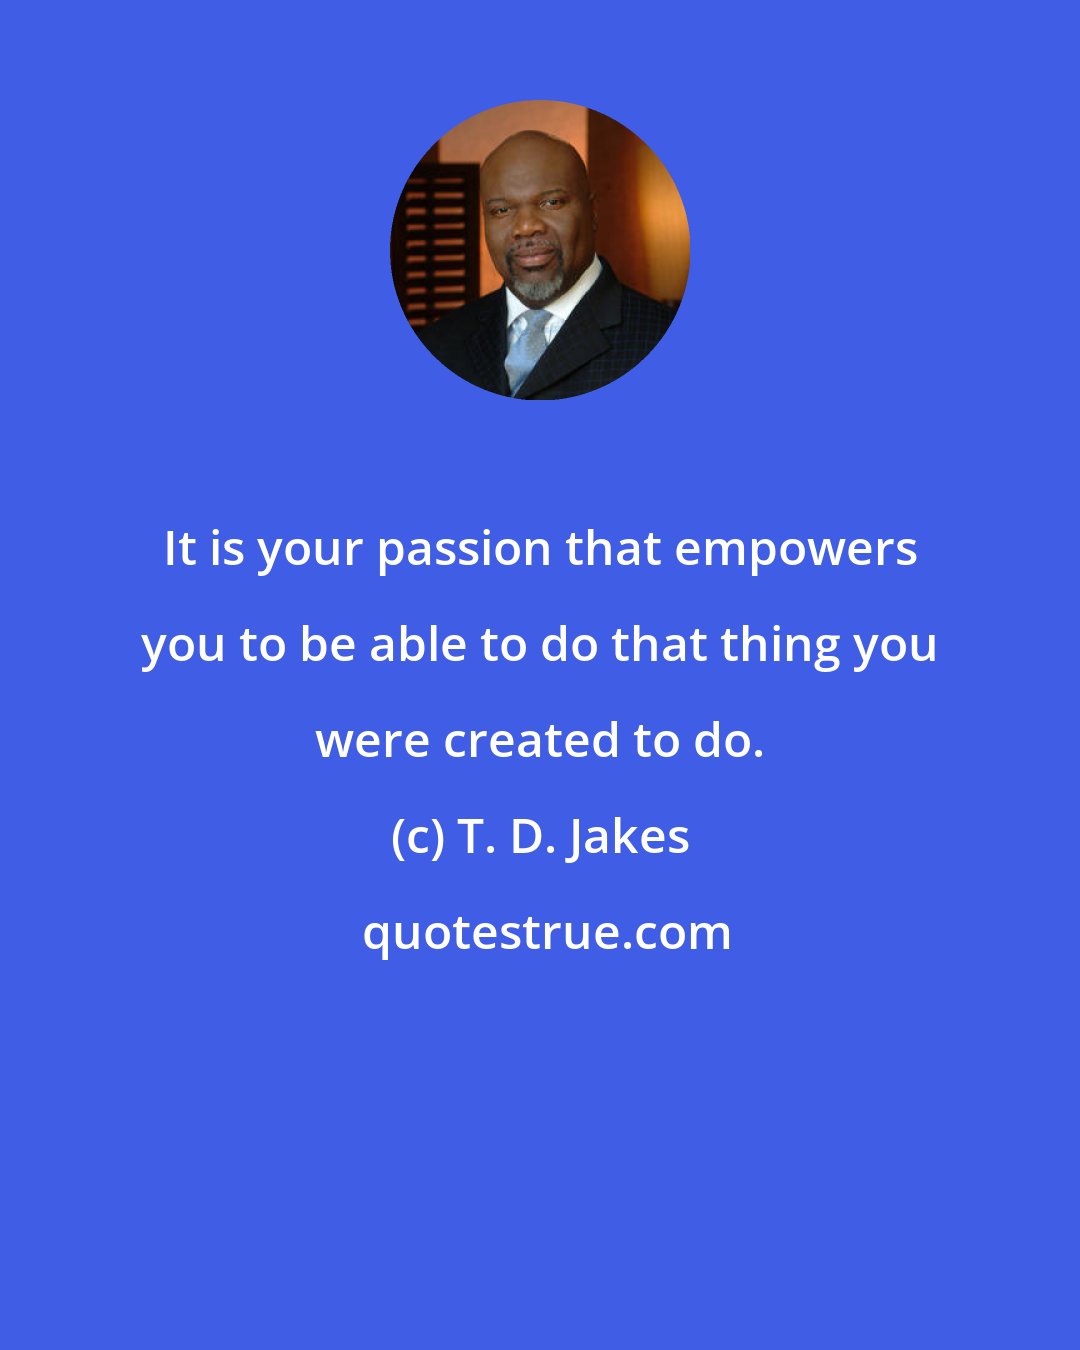 T. D. Jakes: It is your passion that empowers you to be able to do that thing you were created to do.